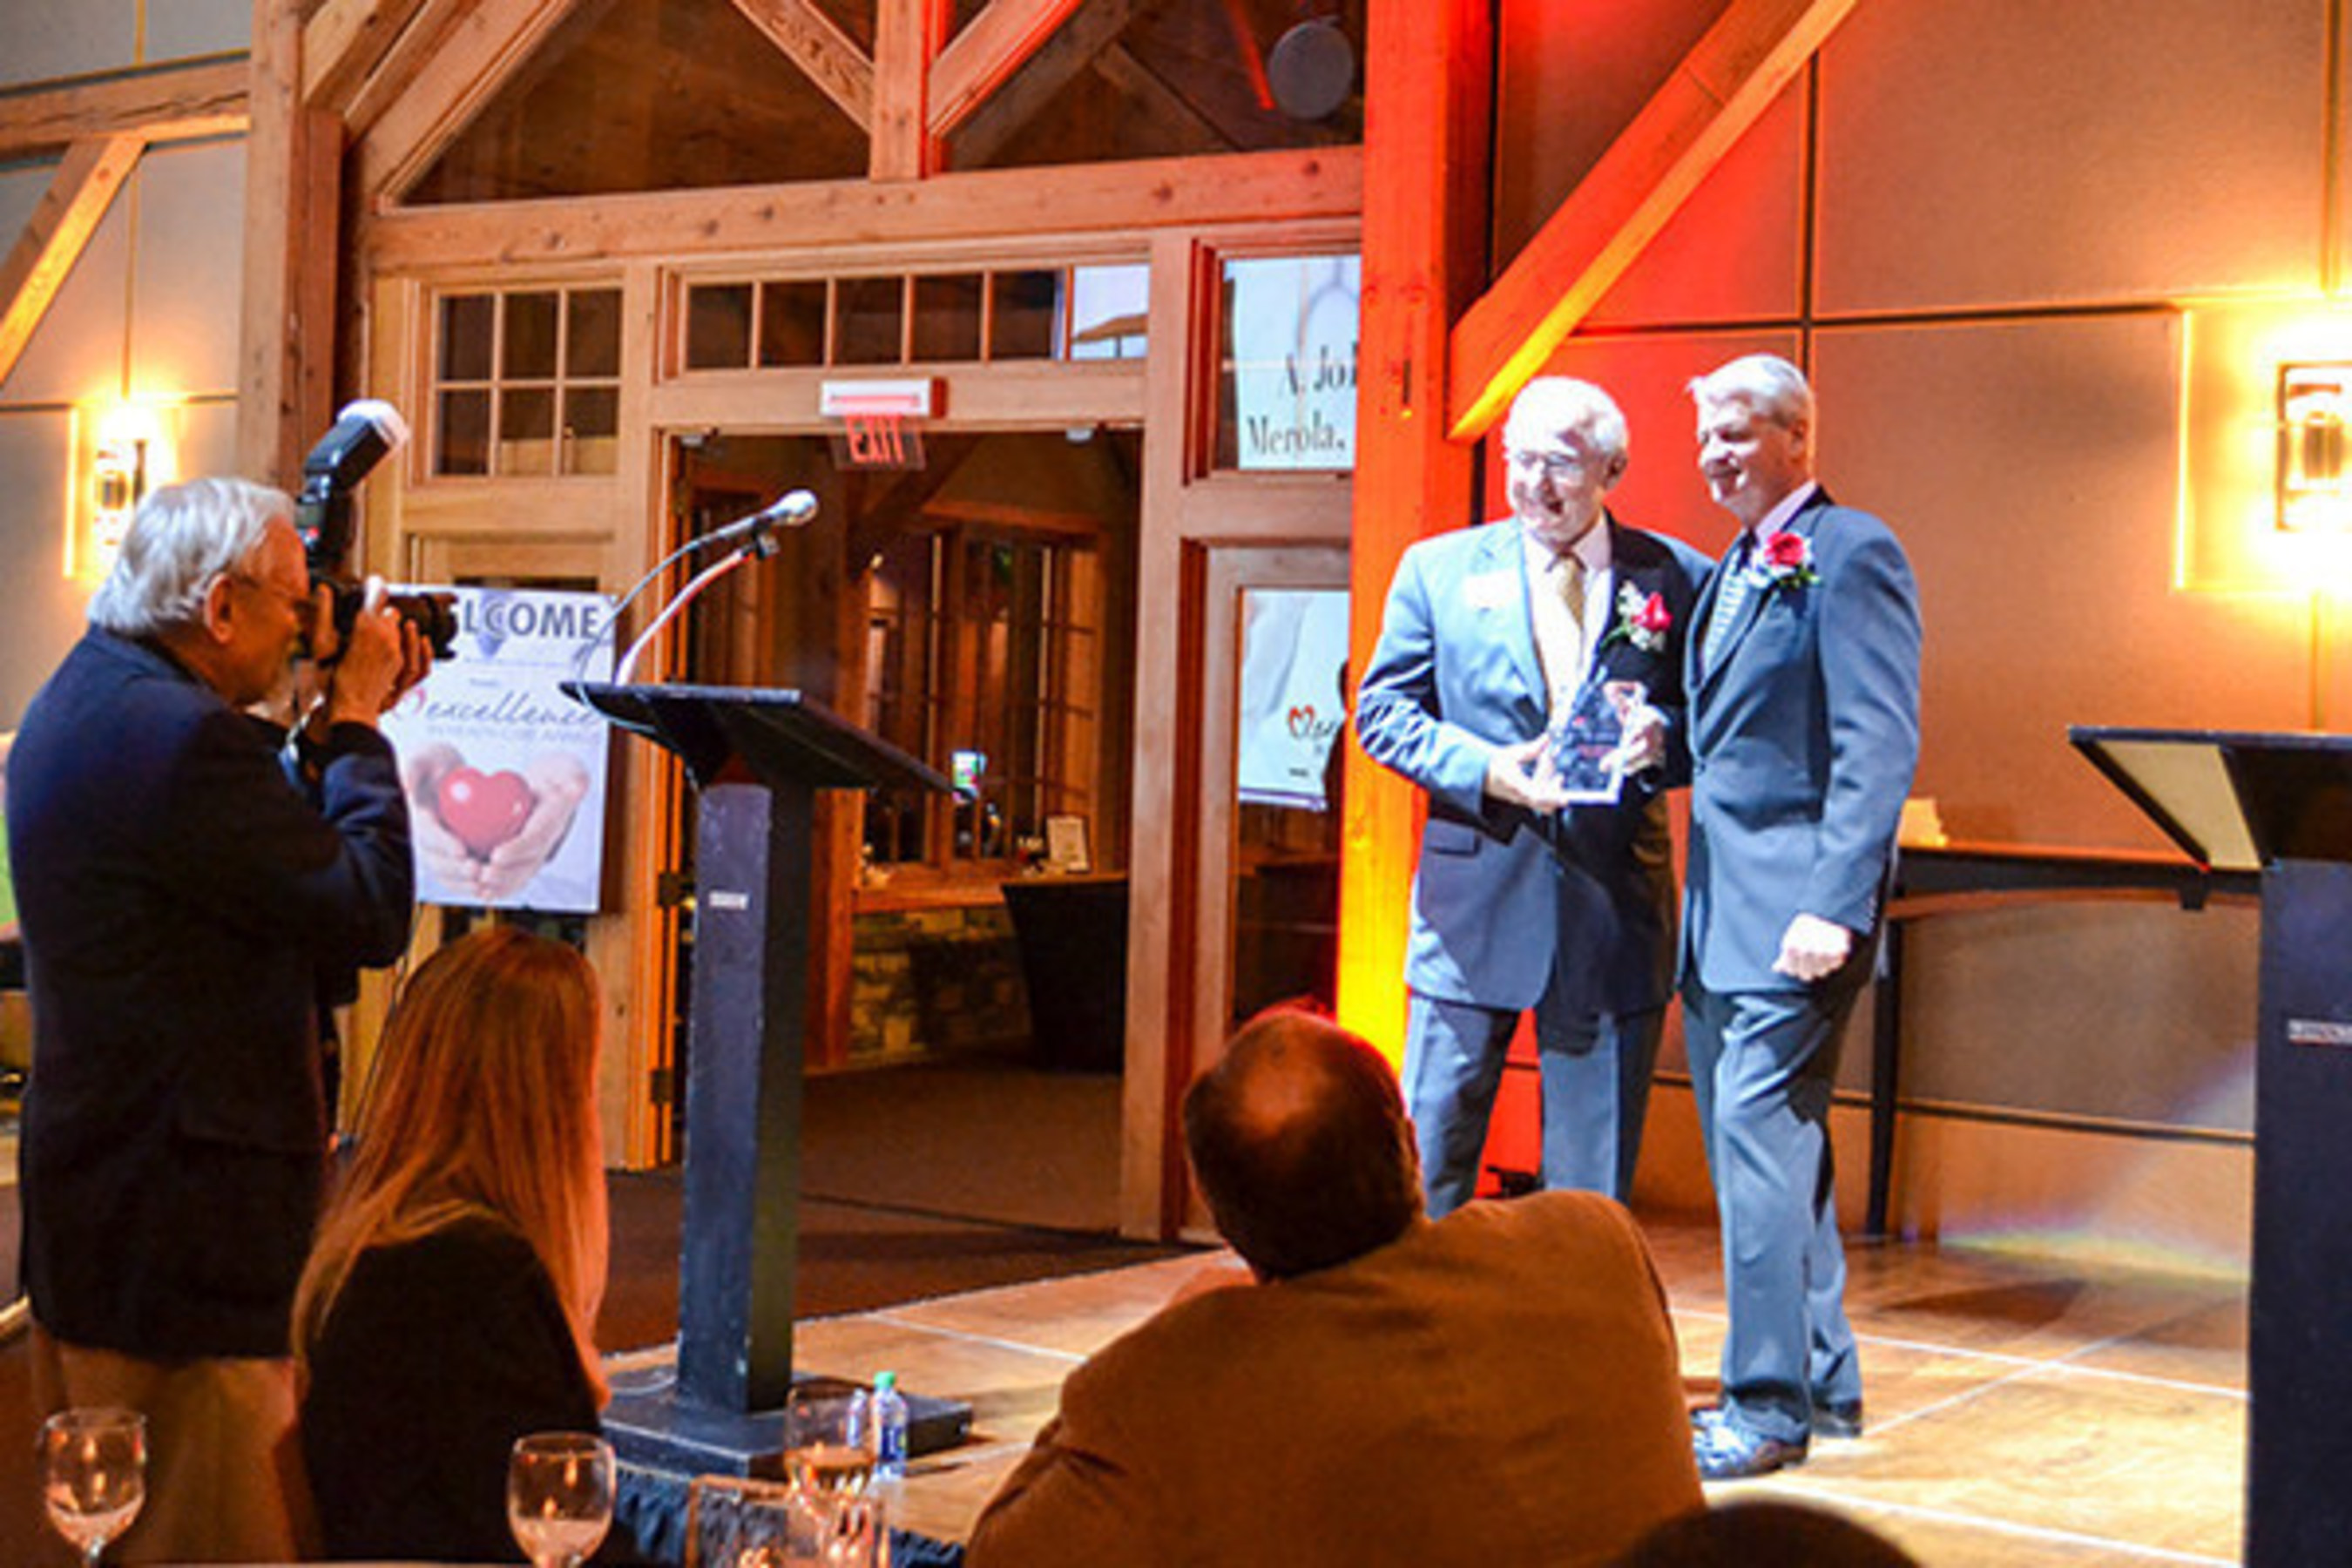 Scott Brennan of Bankers Healthcare Group (right) presents Dr. A. John Merola (left) with the inaugural Lifetime Health-Care Achievement Award and announces that the award will carry his name going forward: the Dr. A. John Merola Lifetime Health-Care Achievement Award.